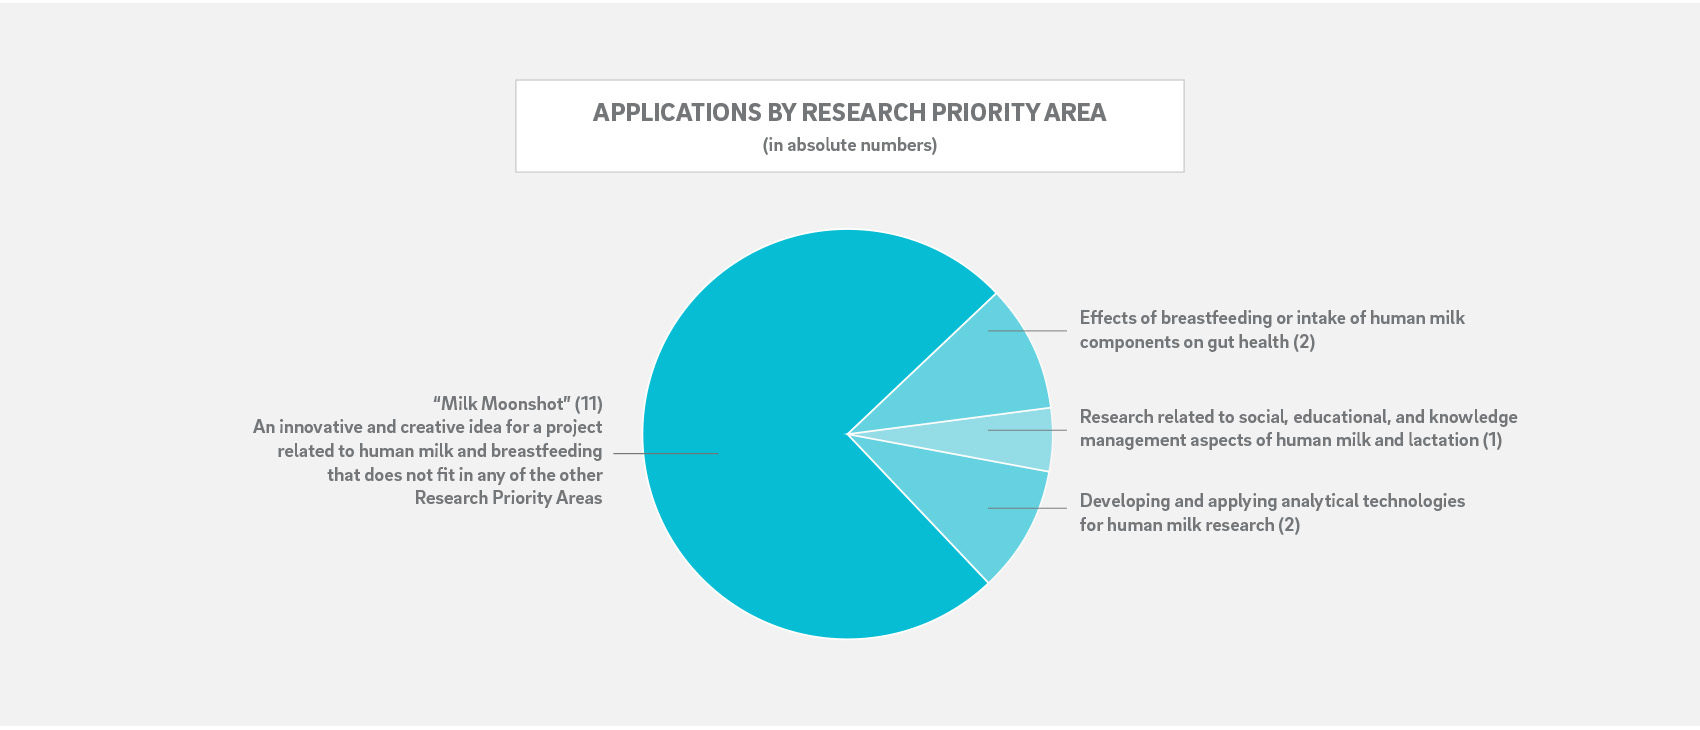 pie chart for percentagese of applications by research priority area